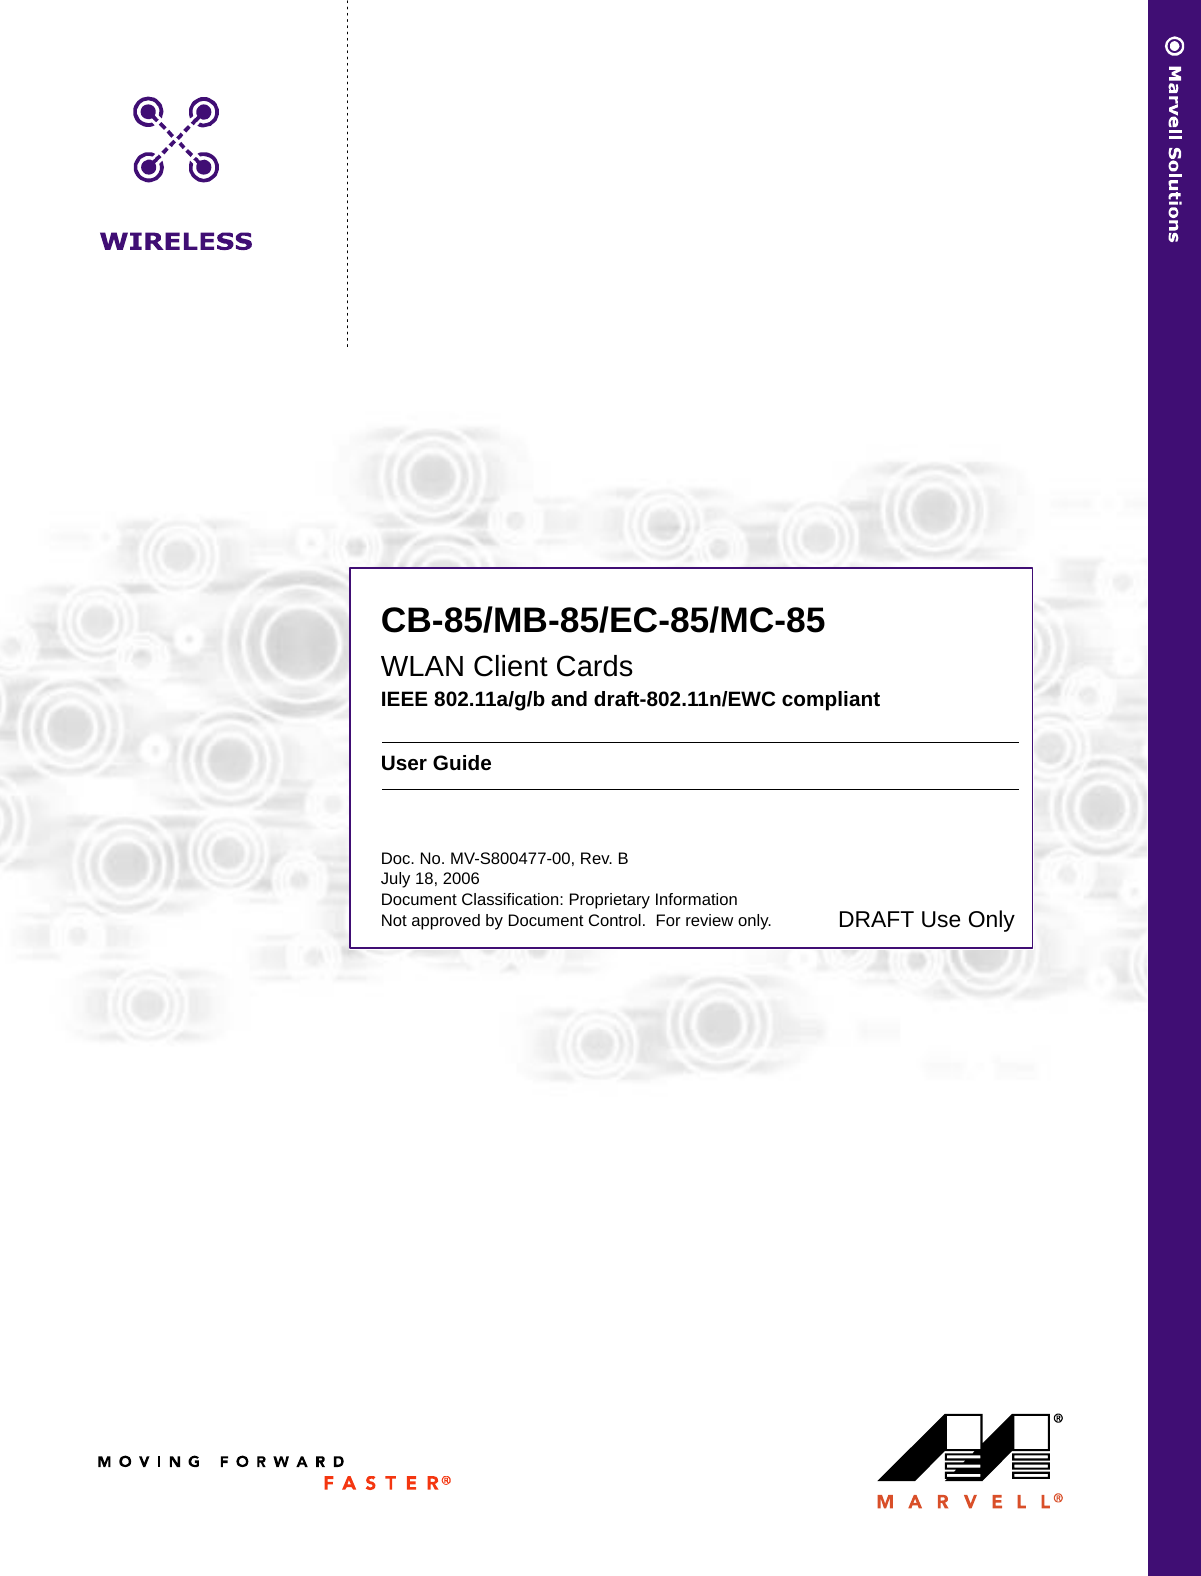 CB-85/MB-85/EC-85/MC-85WLAN Client CardsIEEE 802.11a/g/b and draft-802.11n/EWC compliantUser GuideDoc. No. MV-S800477-00, Rev. BJuly 18, 2006Document Classification: Proprietary InformationNot approved by Document Control.  For review only.CoverDRAFT Use Only